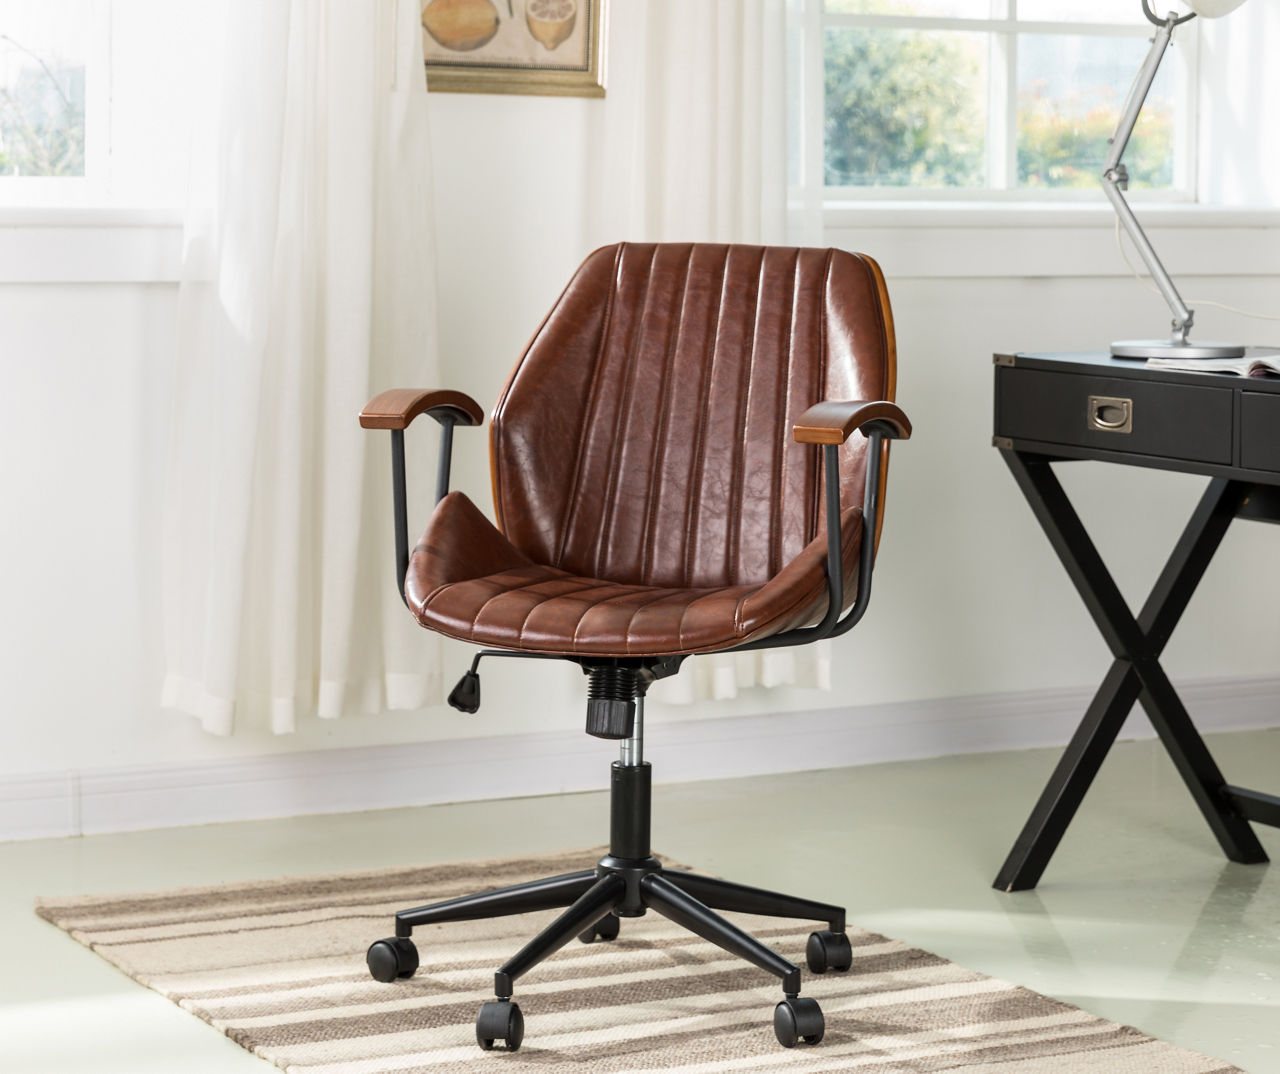 Glitzhome Caramel Bonded Leather Gaslift Adjustable Swivel Office Chair/Desk Chair